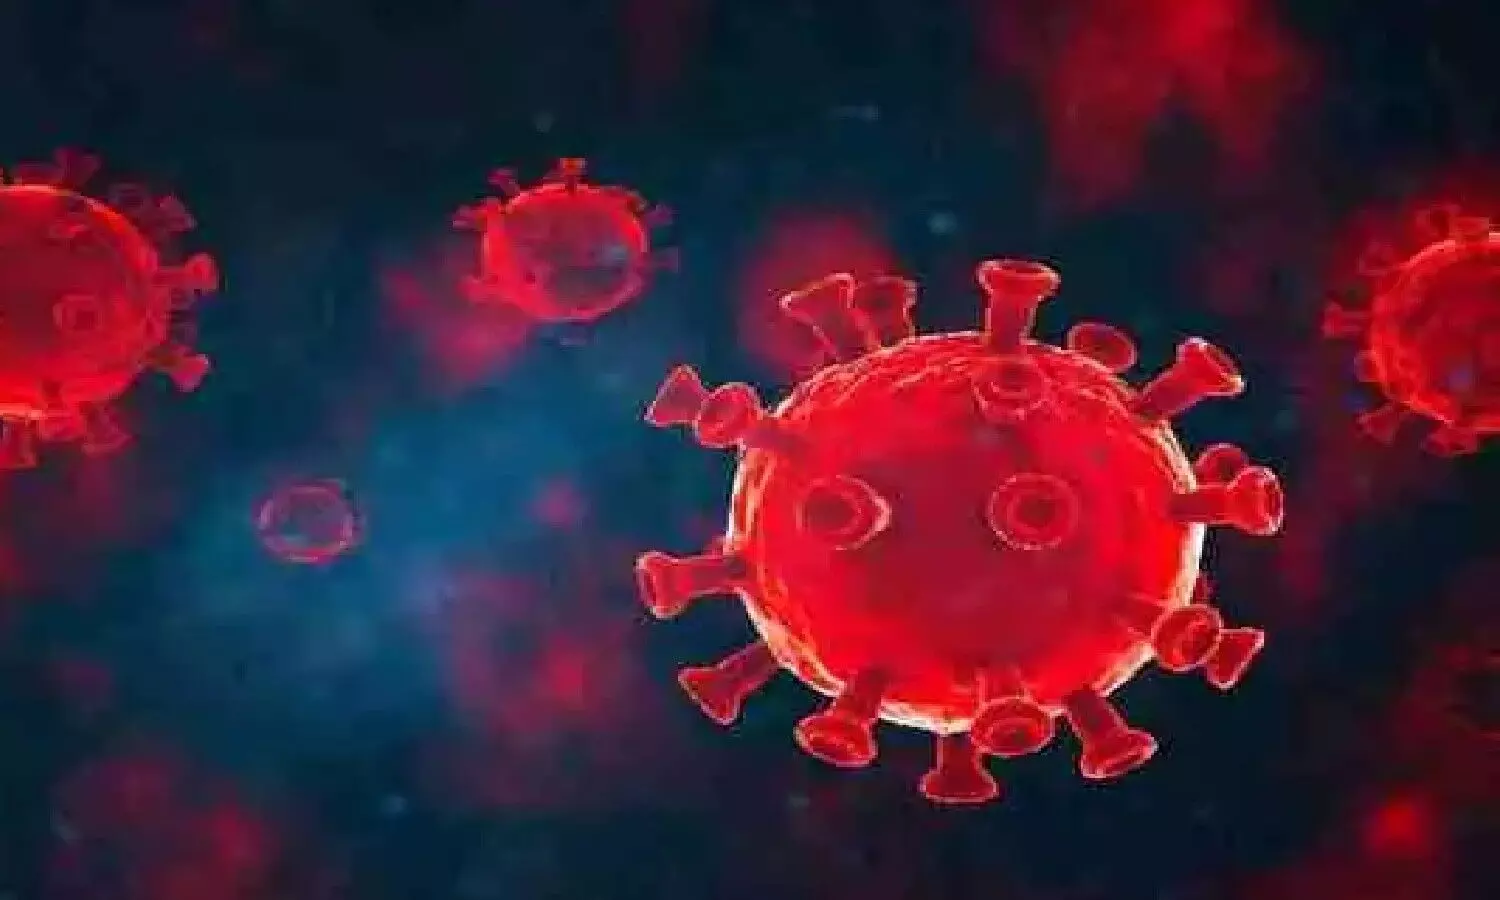 Delta Plus, a new form of corona virus, that this variant has the ability to neutralize the vaccine and antibodies.